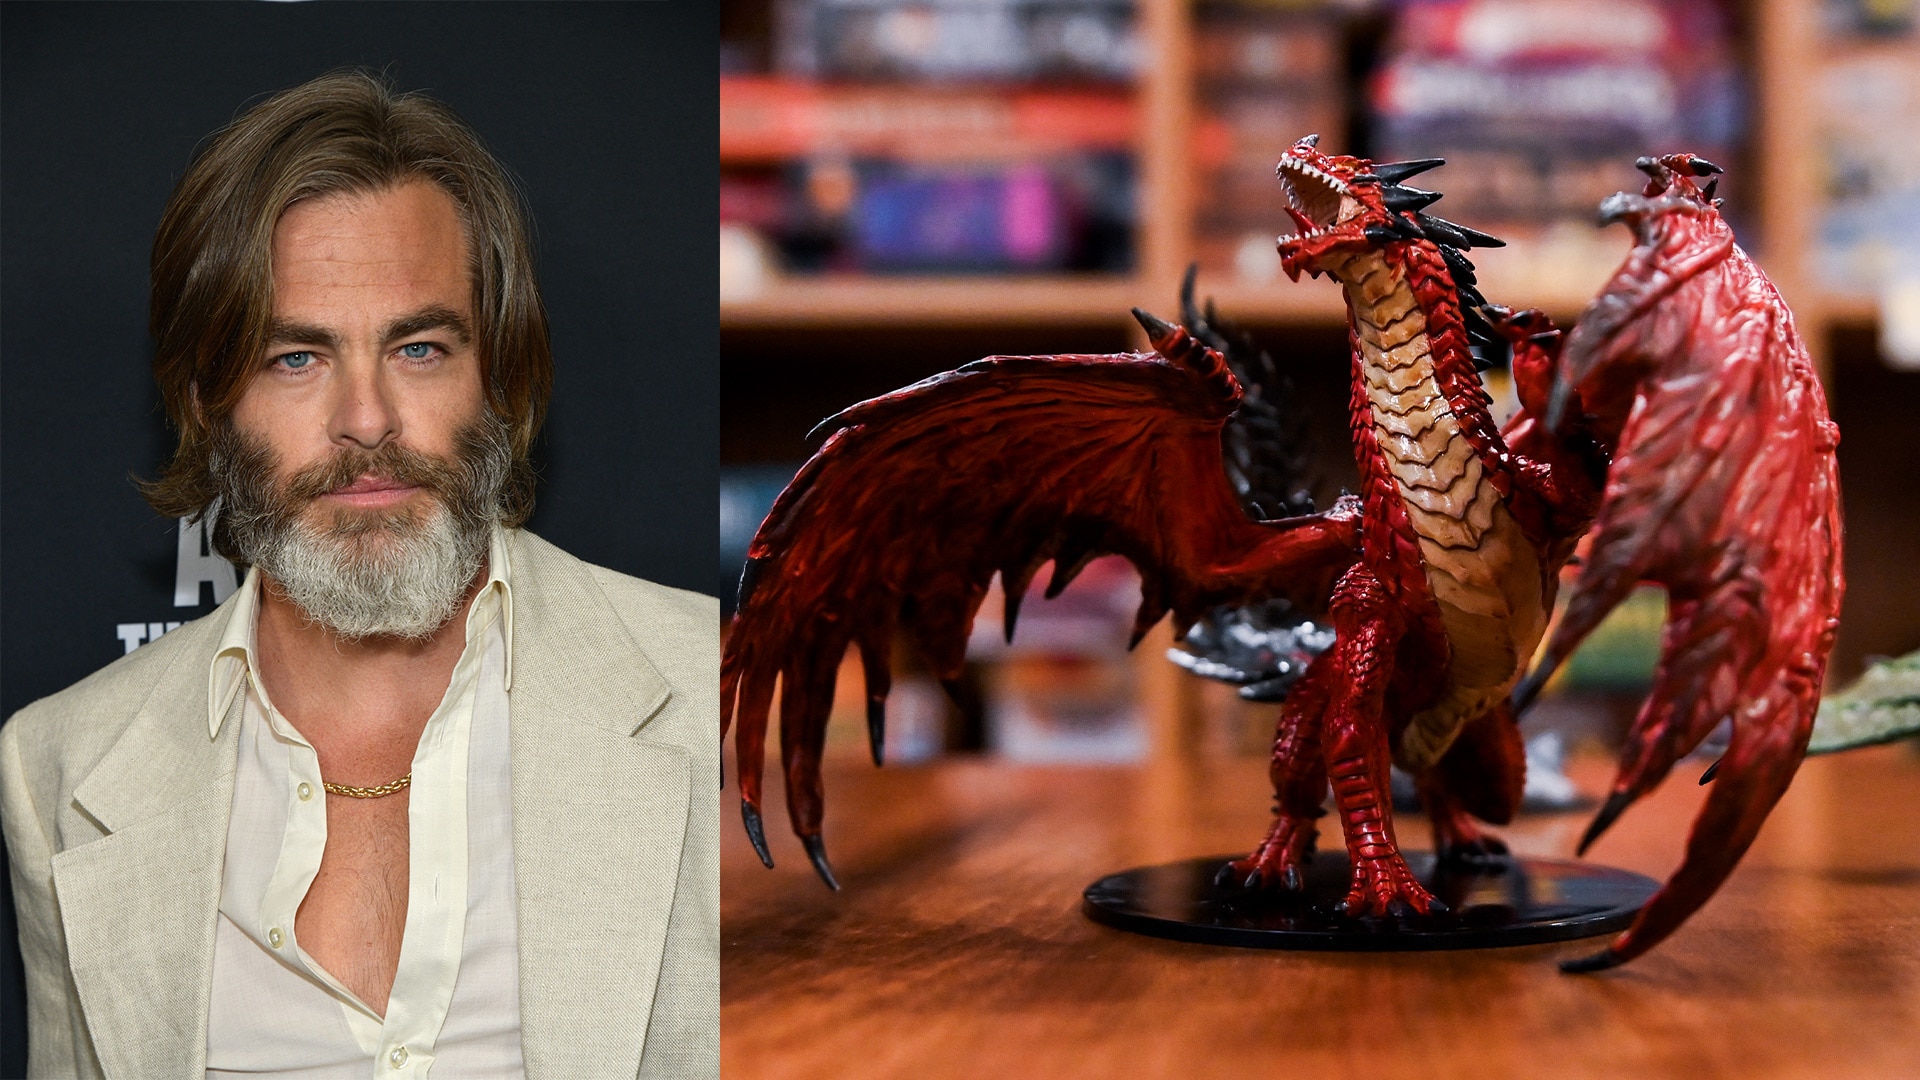 GAME OF THRONES Cast to Play at DnD Live 2020